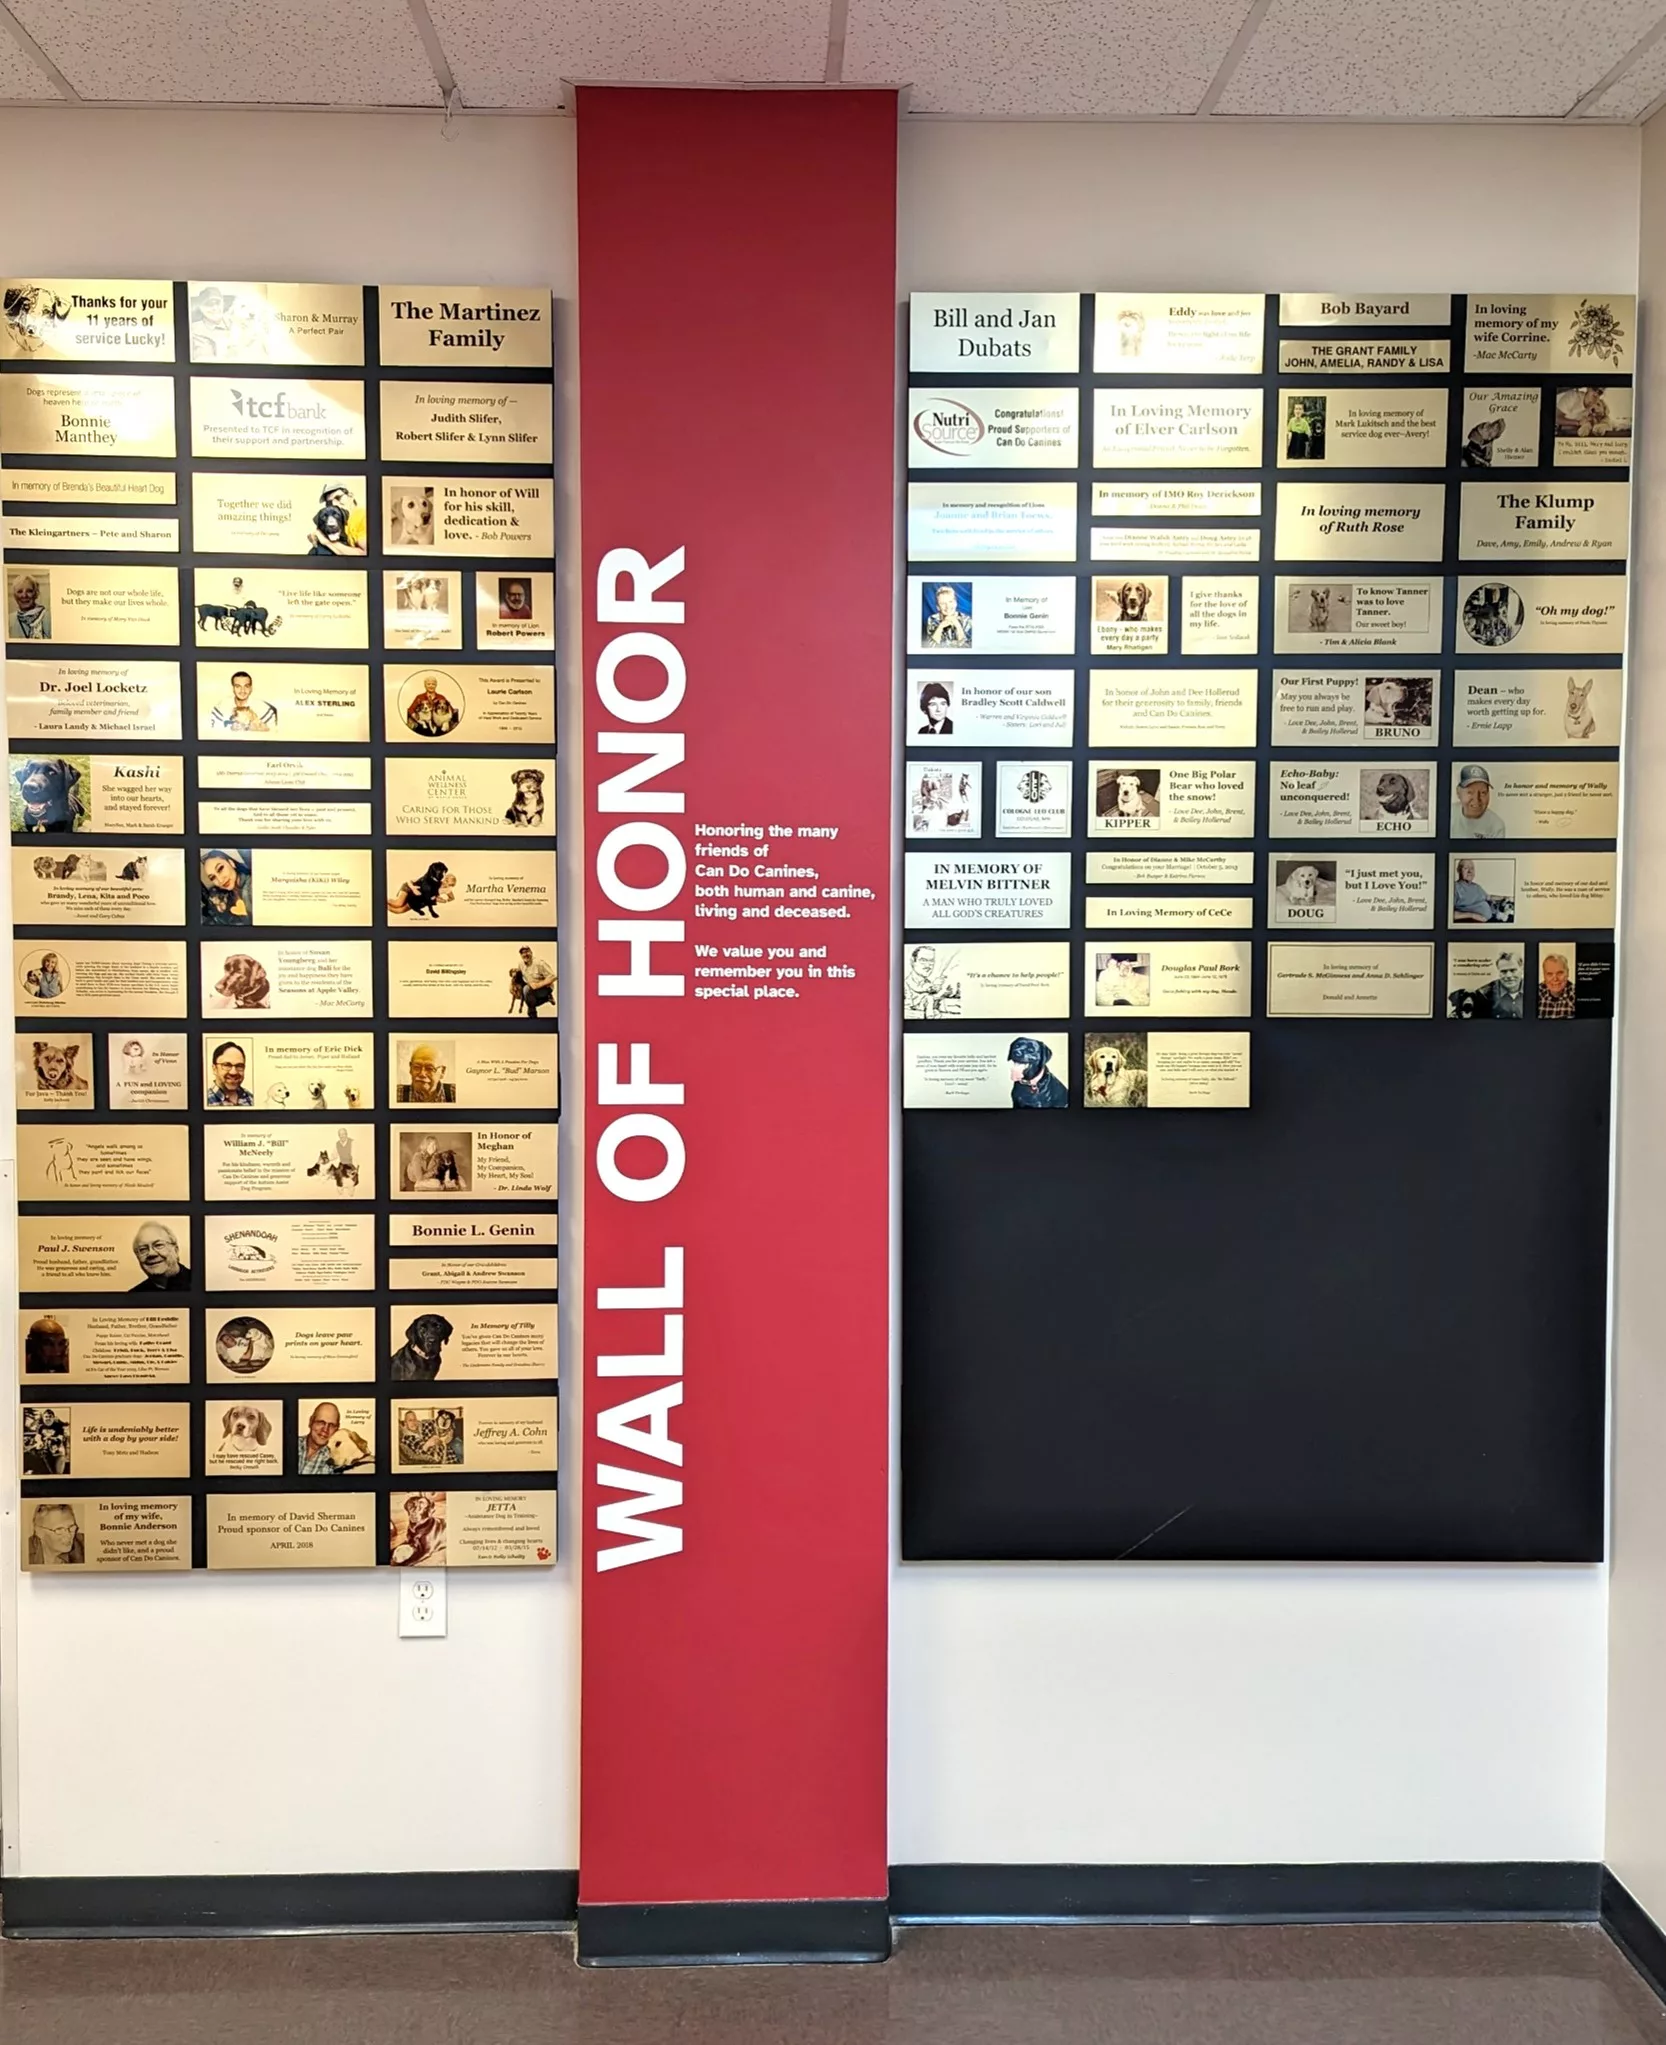 gold plaques mounted on black boards hung on wall with red pillar saying "Hallof Honor" between them